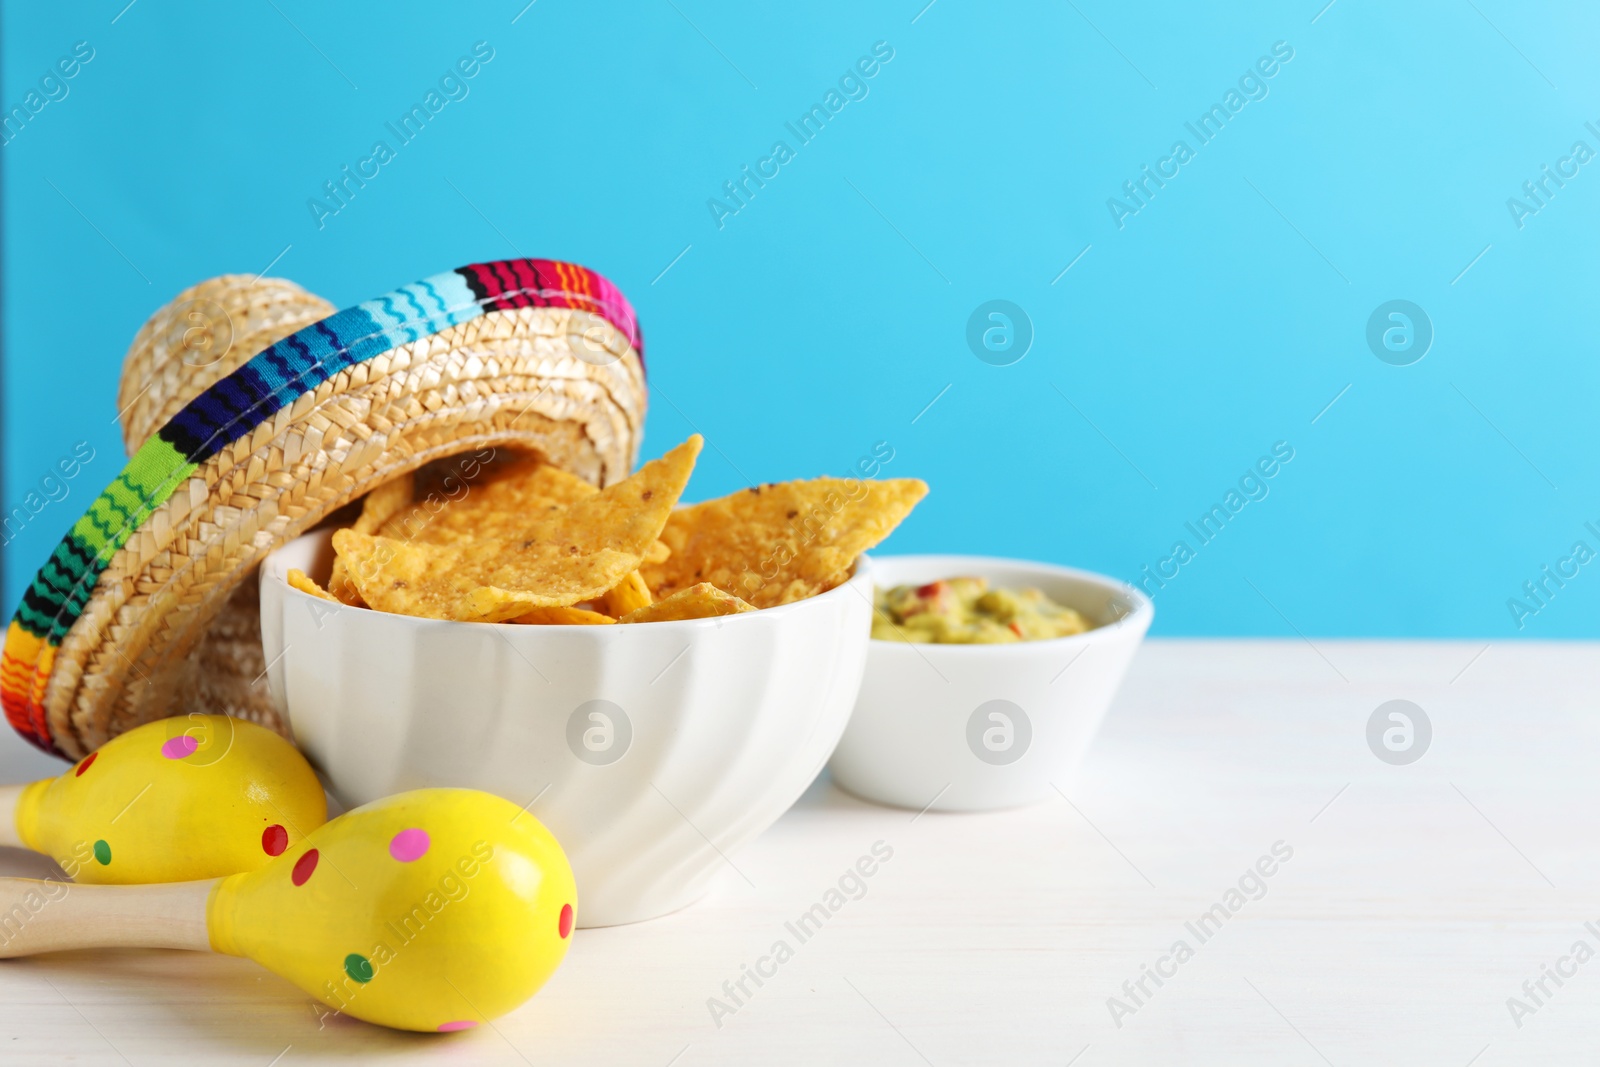 Photo of Mexican sombrero hat, nachos chips, guacamole and maracas on white wooden table. Space for text